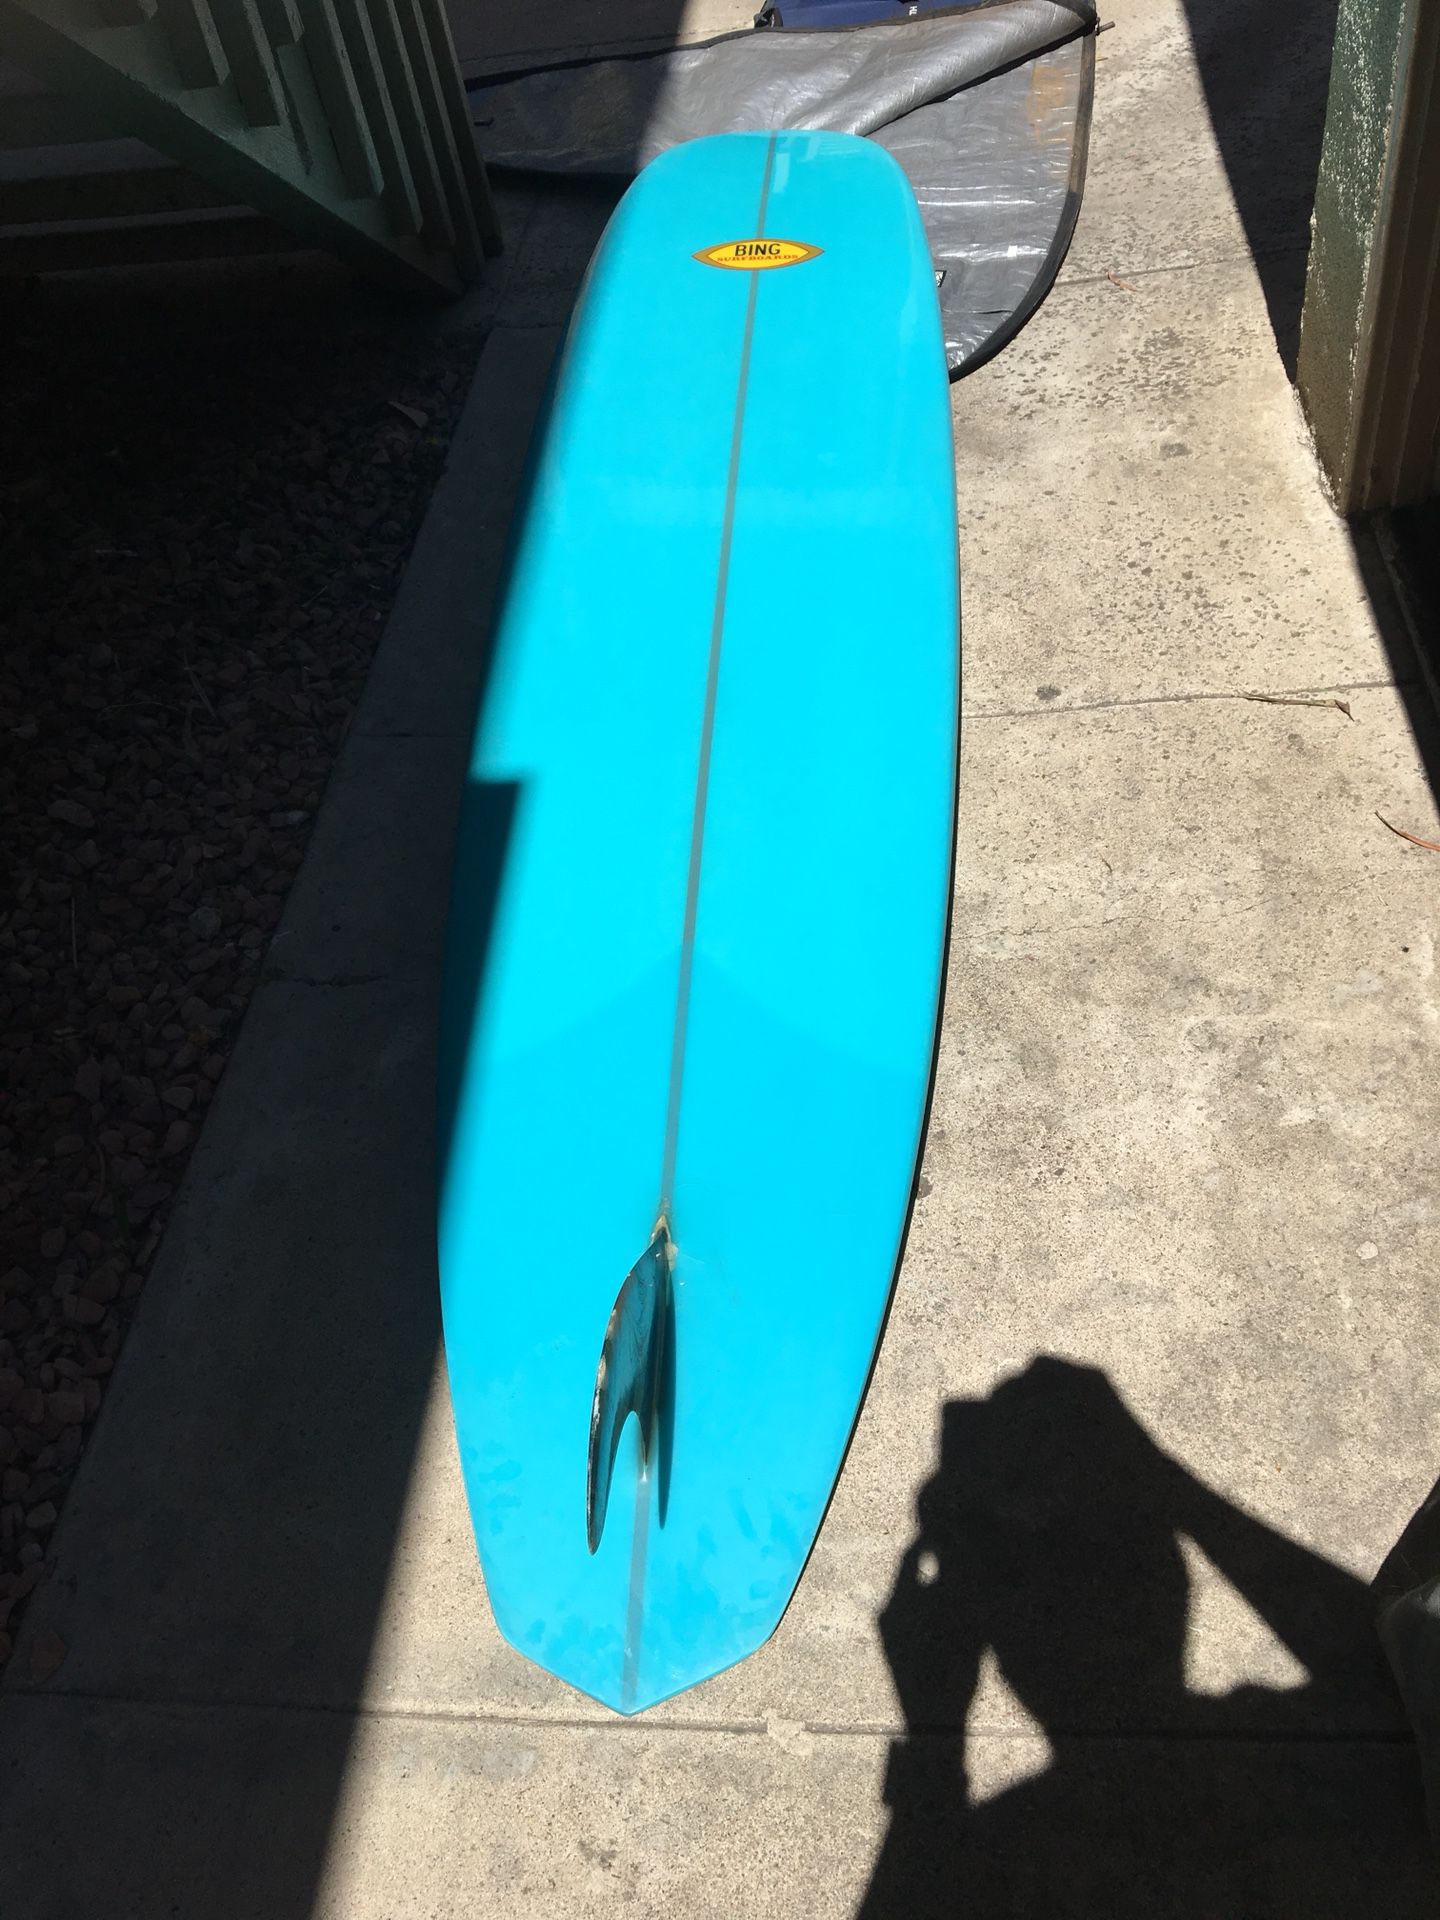 Two bing surfboards one model m lovebird 9’4” singlefin great condition,and bing silver spoon with step deck also 9’4” singlefin almost new condition